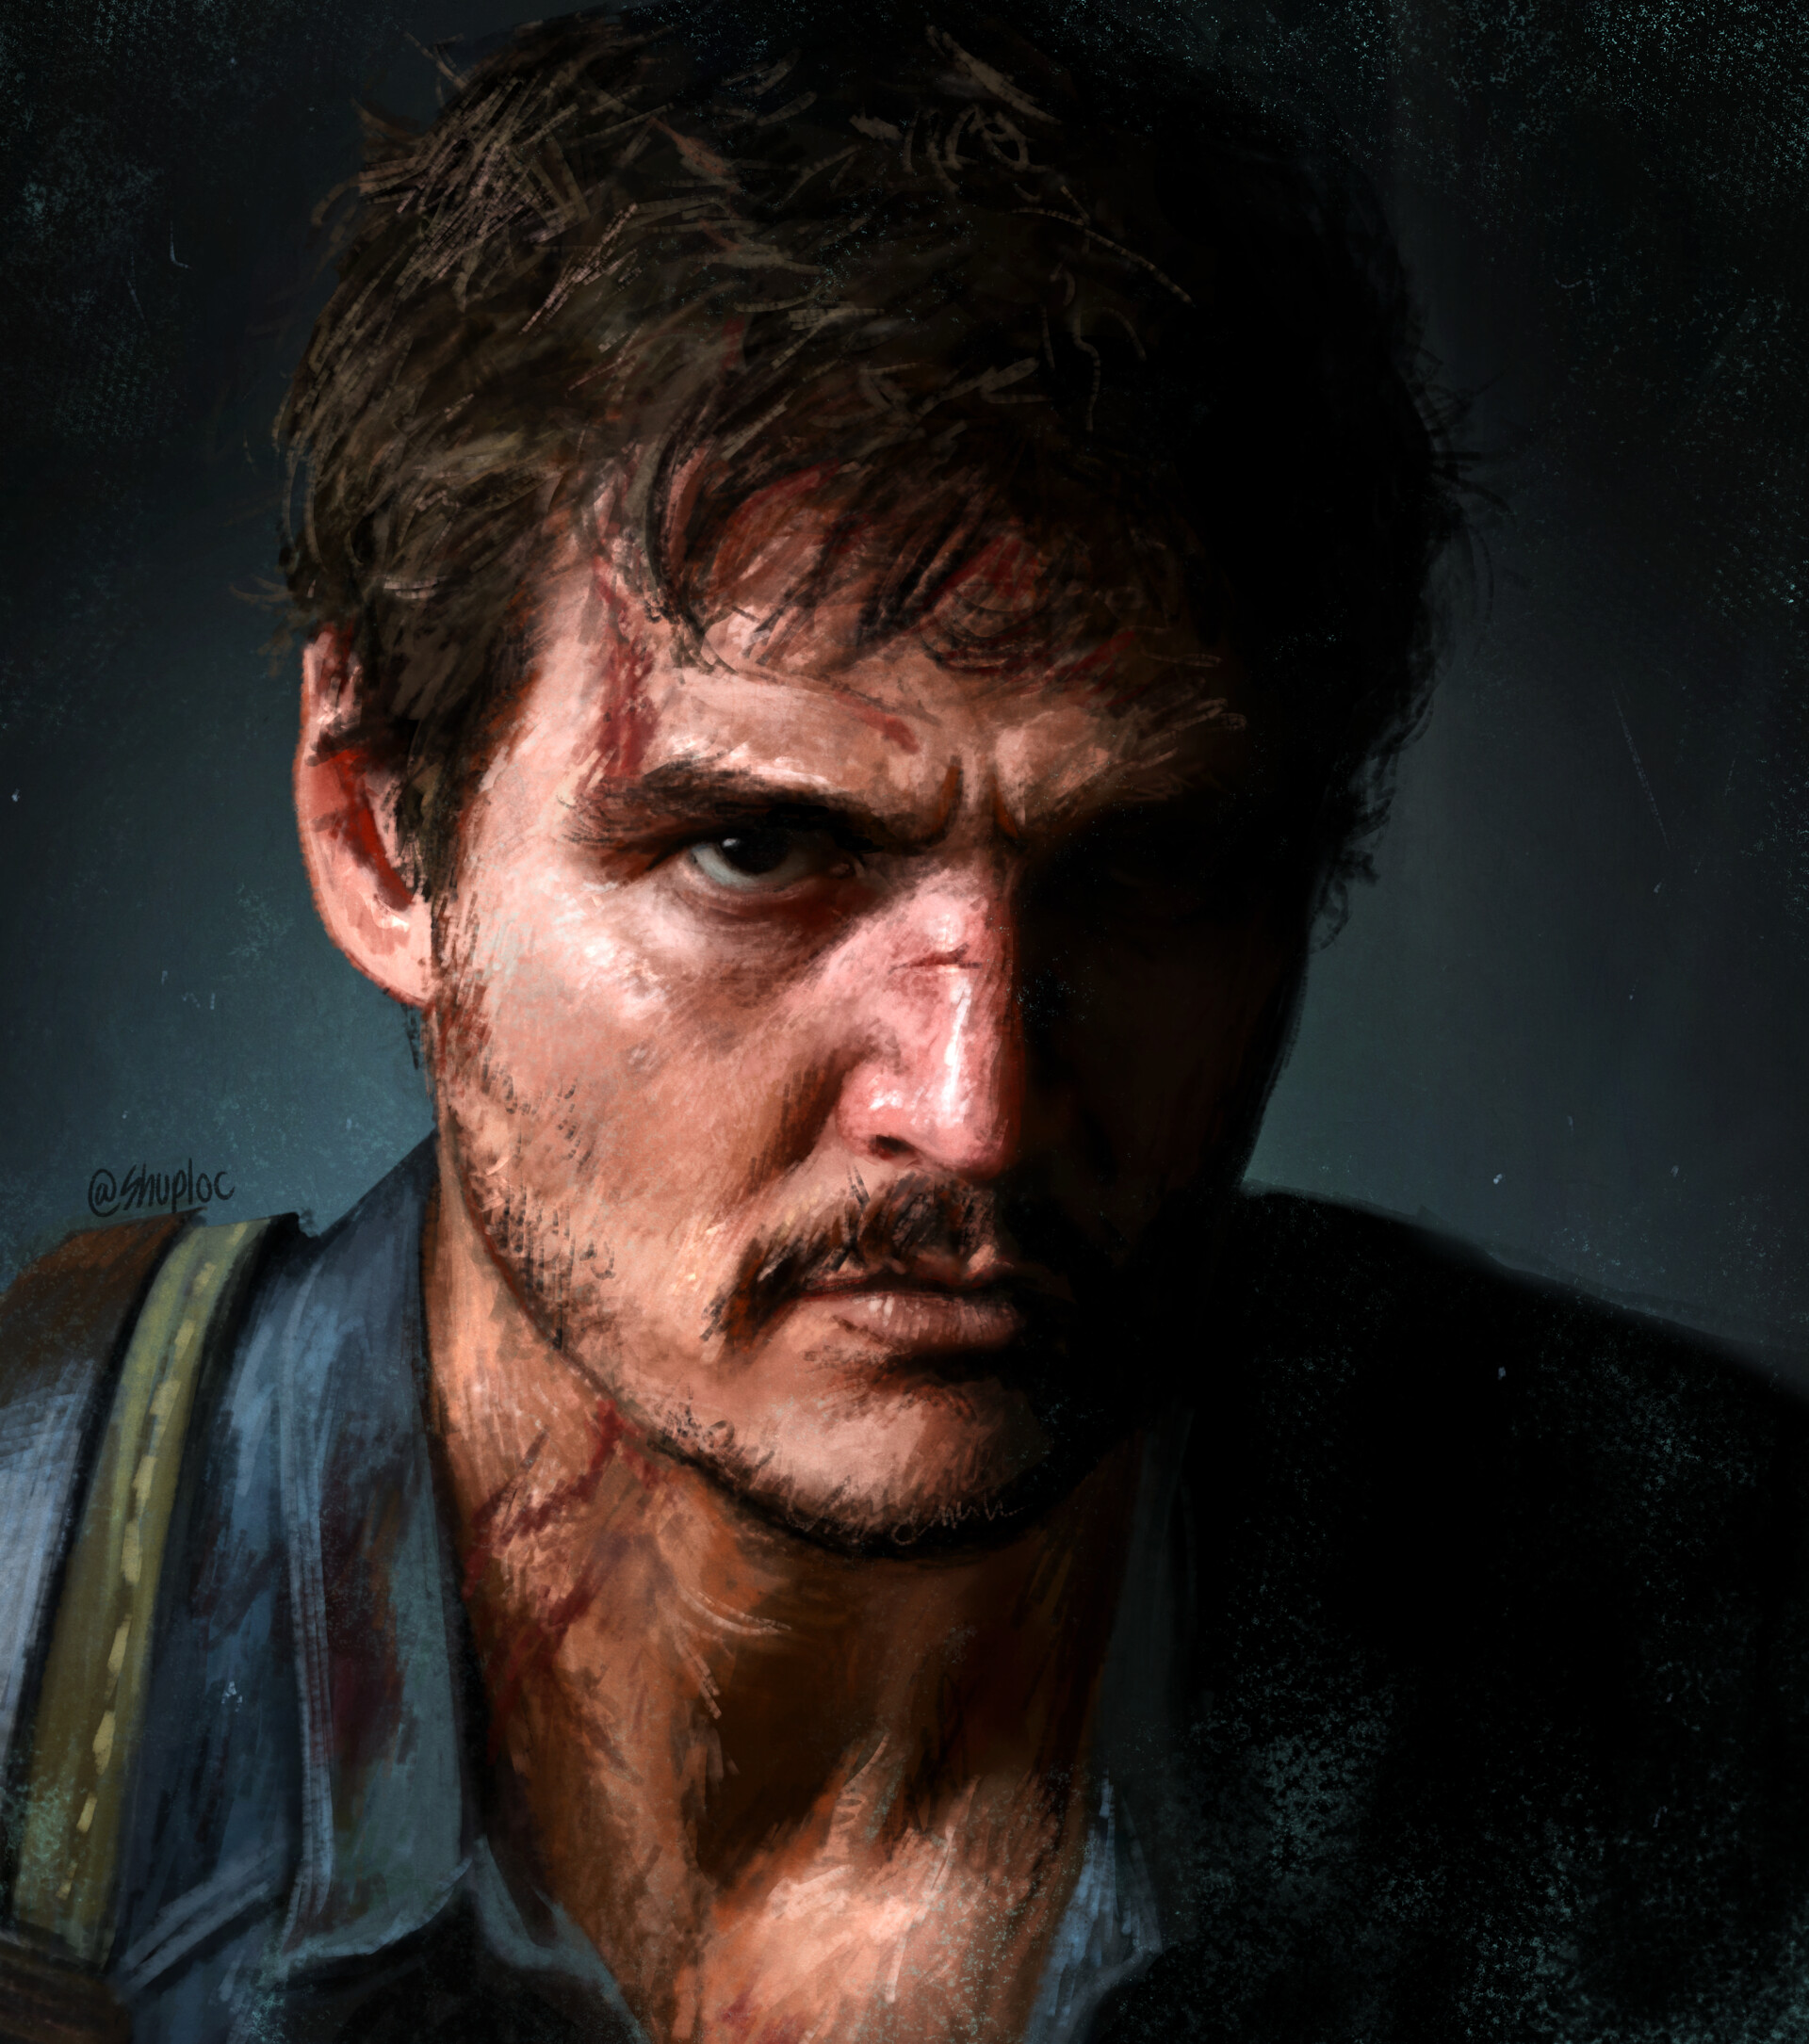 The Last of Us Part 1 PC Mod Adds Pedro Pascal's Joel